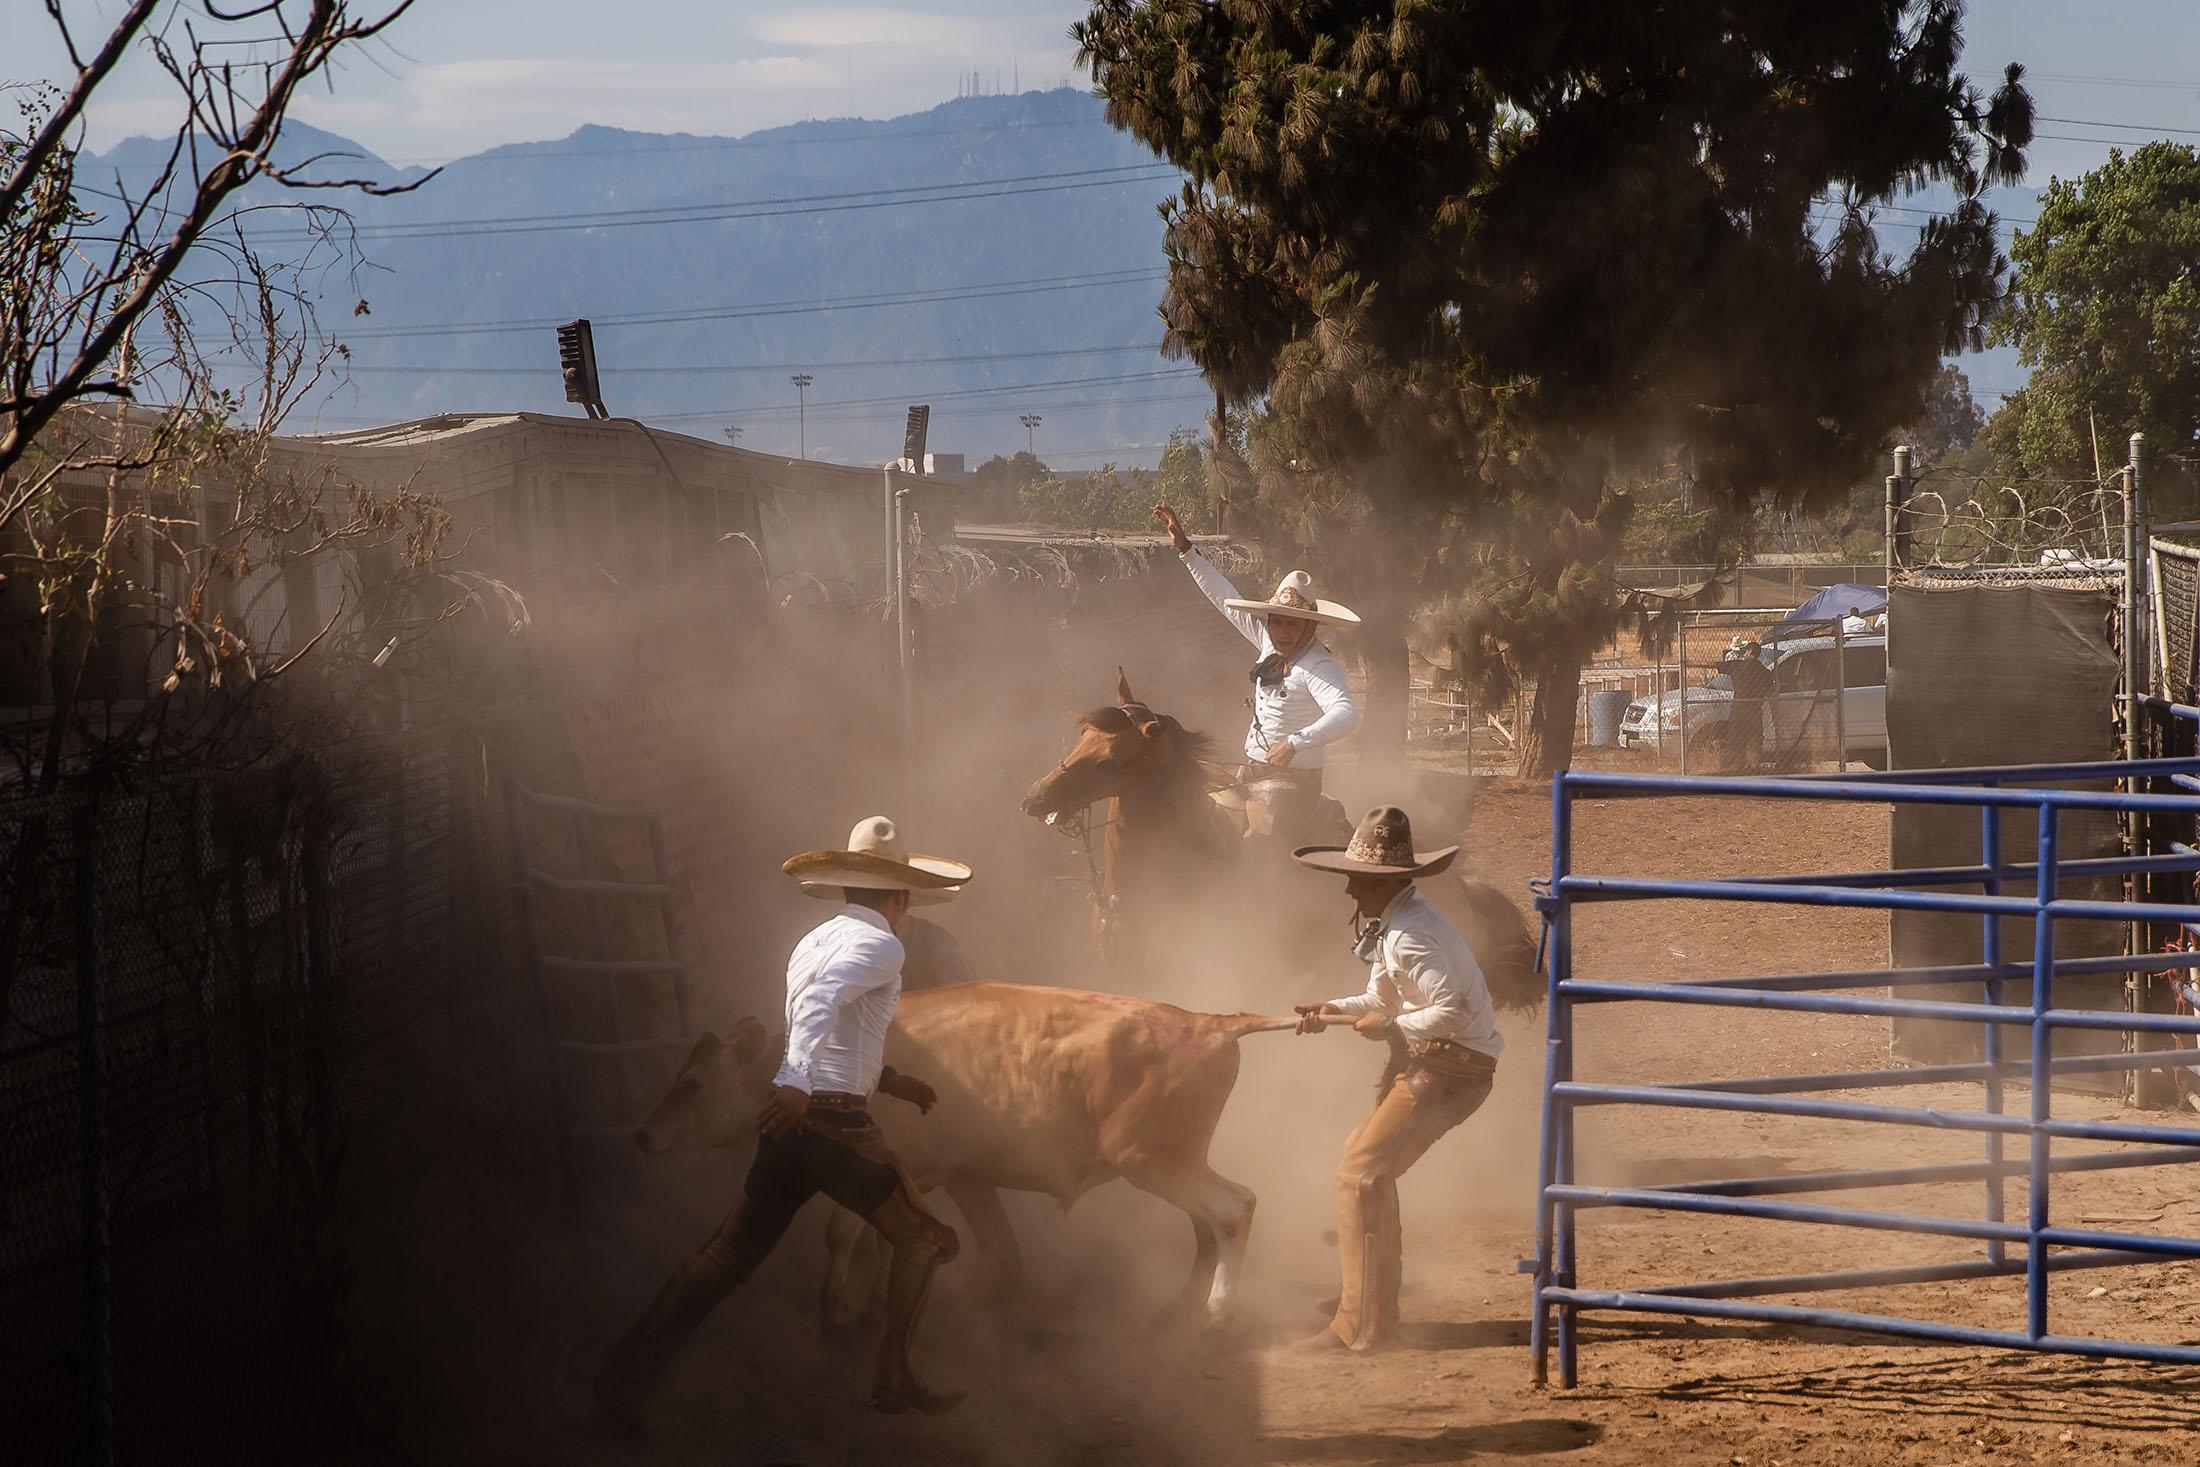 Raudel Jim&eacute;nez (center), a member of the Charro Rancho La Laguna team helps to get a cow that left the Pico Rivera Sports Arena during a charrer&iacute;a competition in Pico Rivera, California on July 16, 2021.